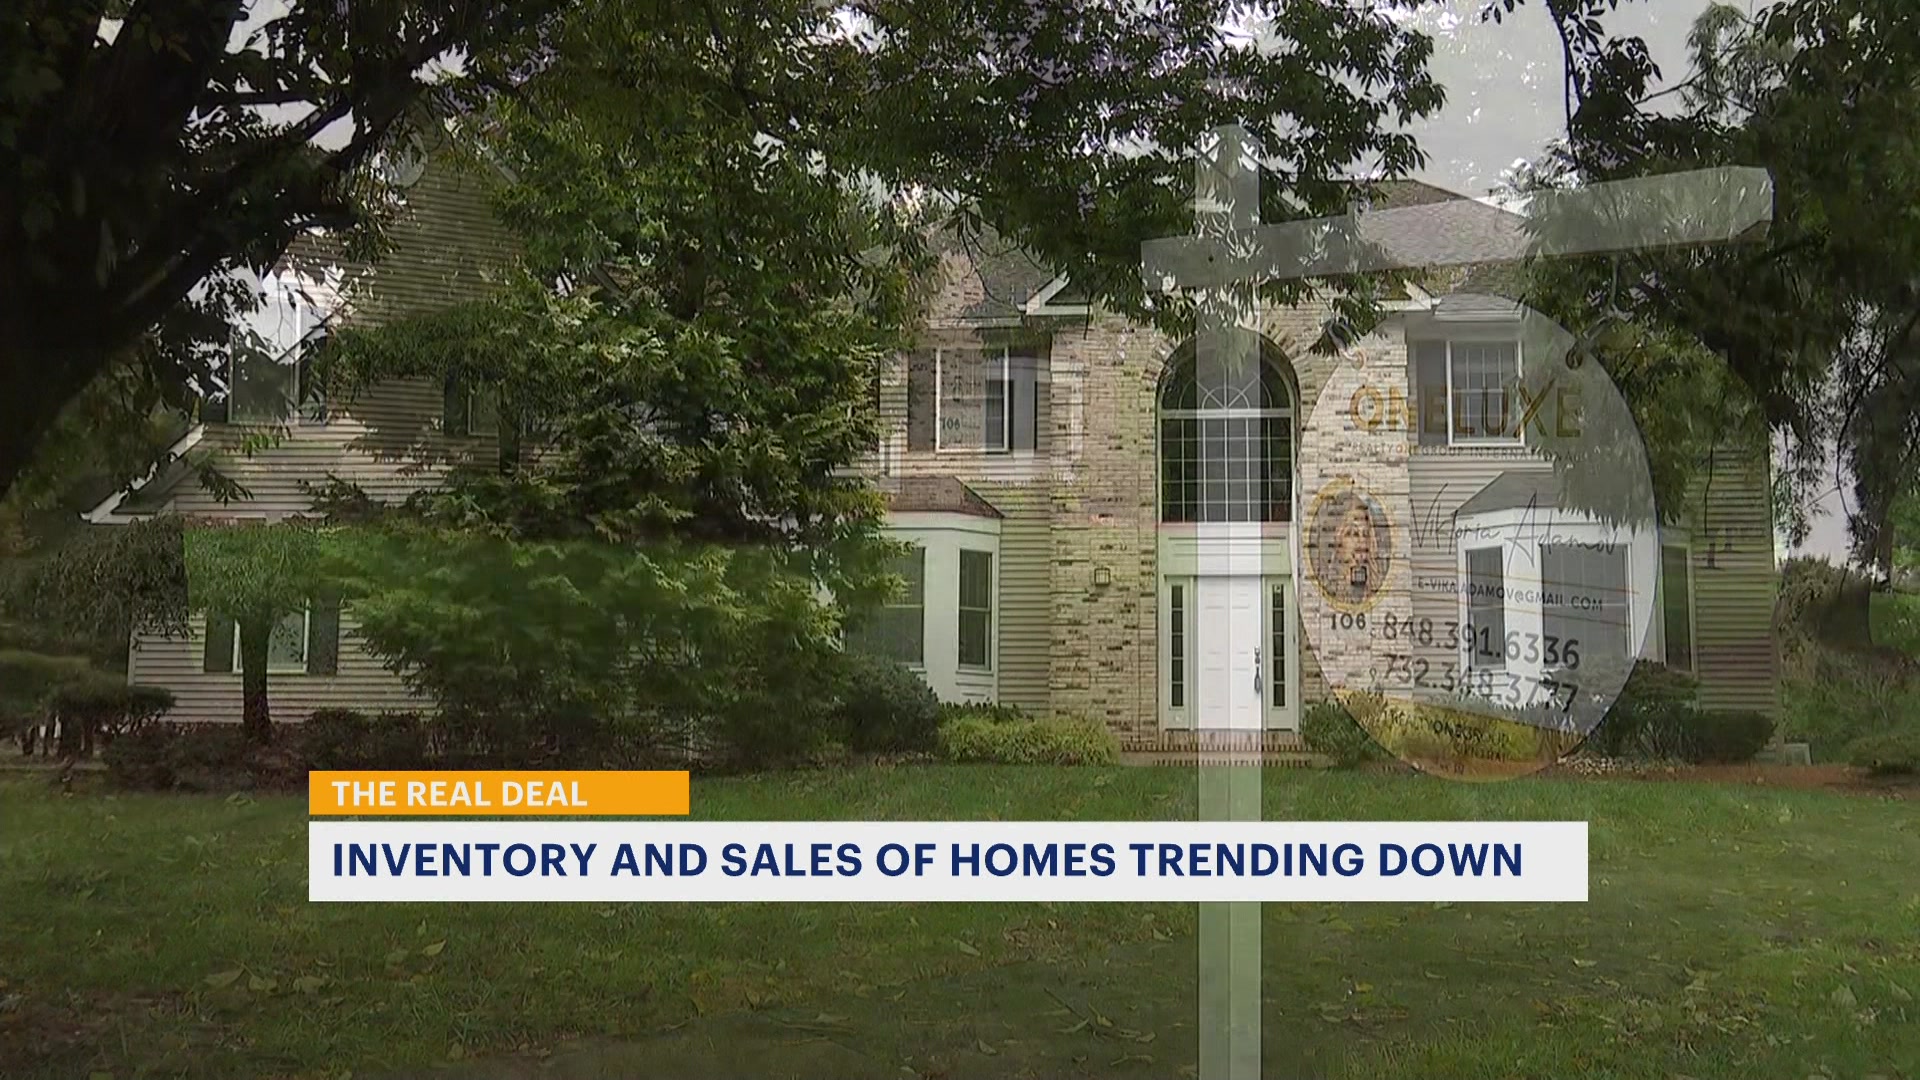 The Real Deal: Housing market inventory, prices on a downward trend